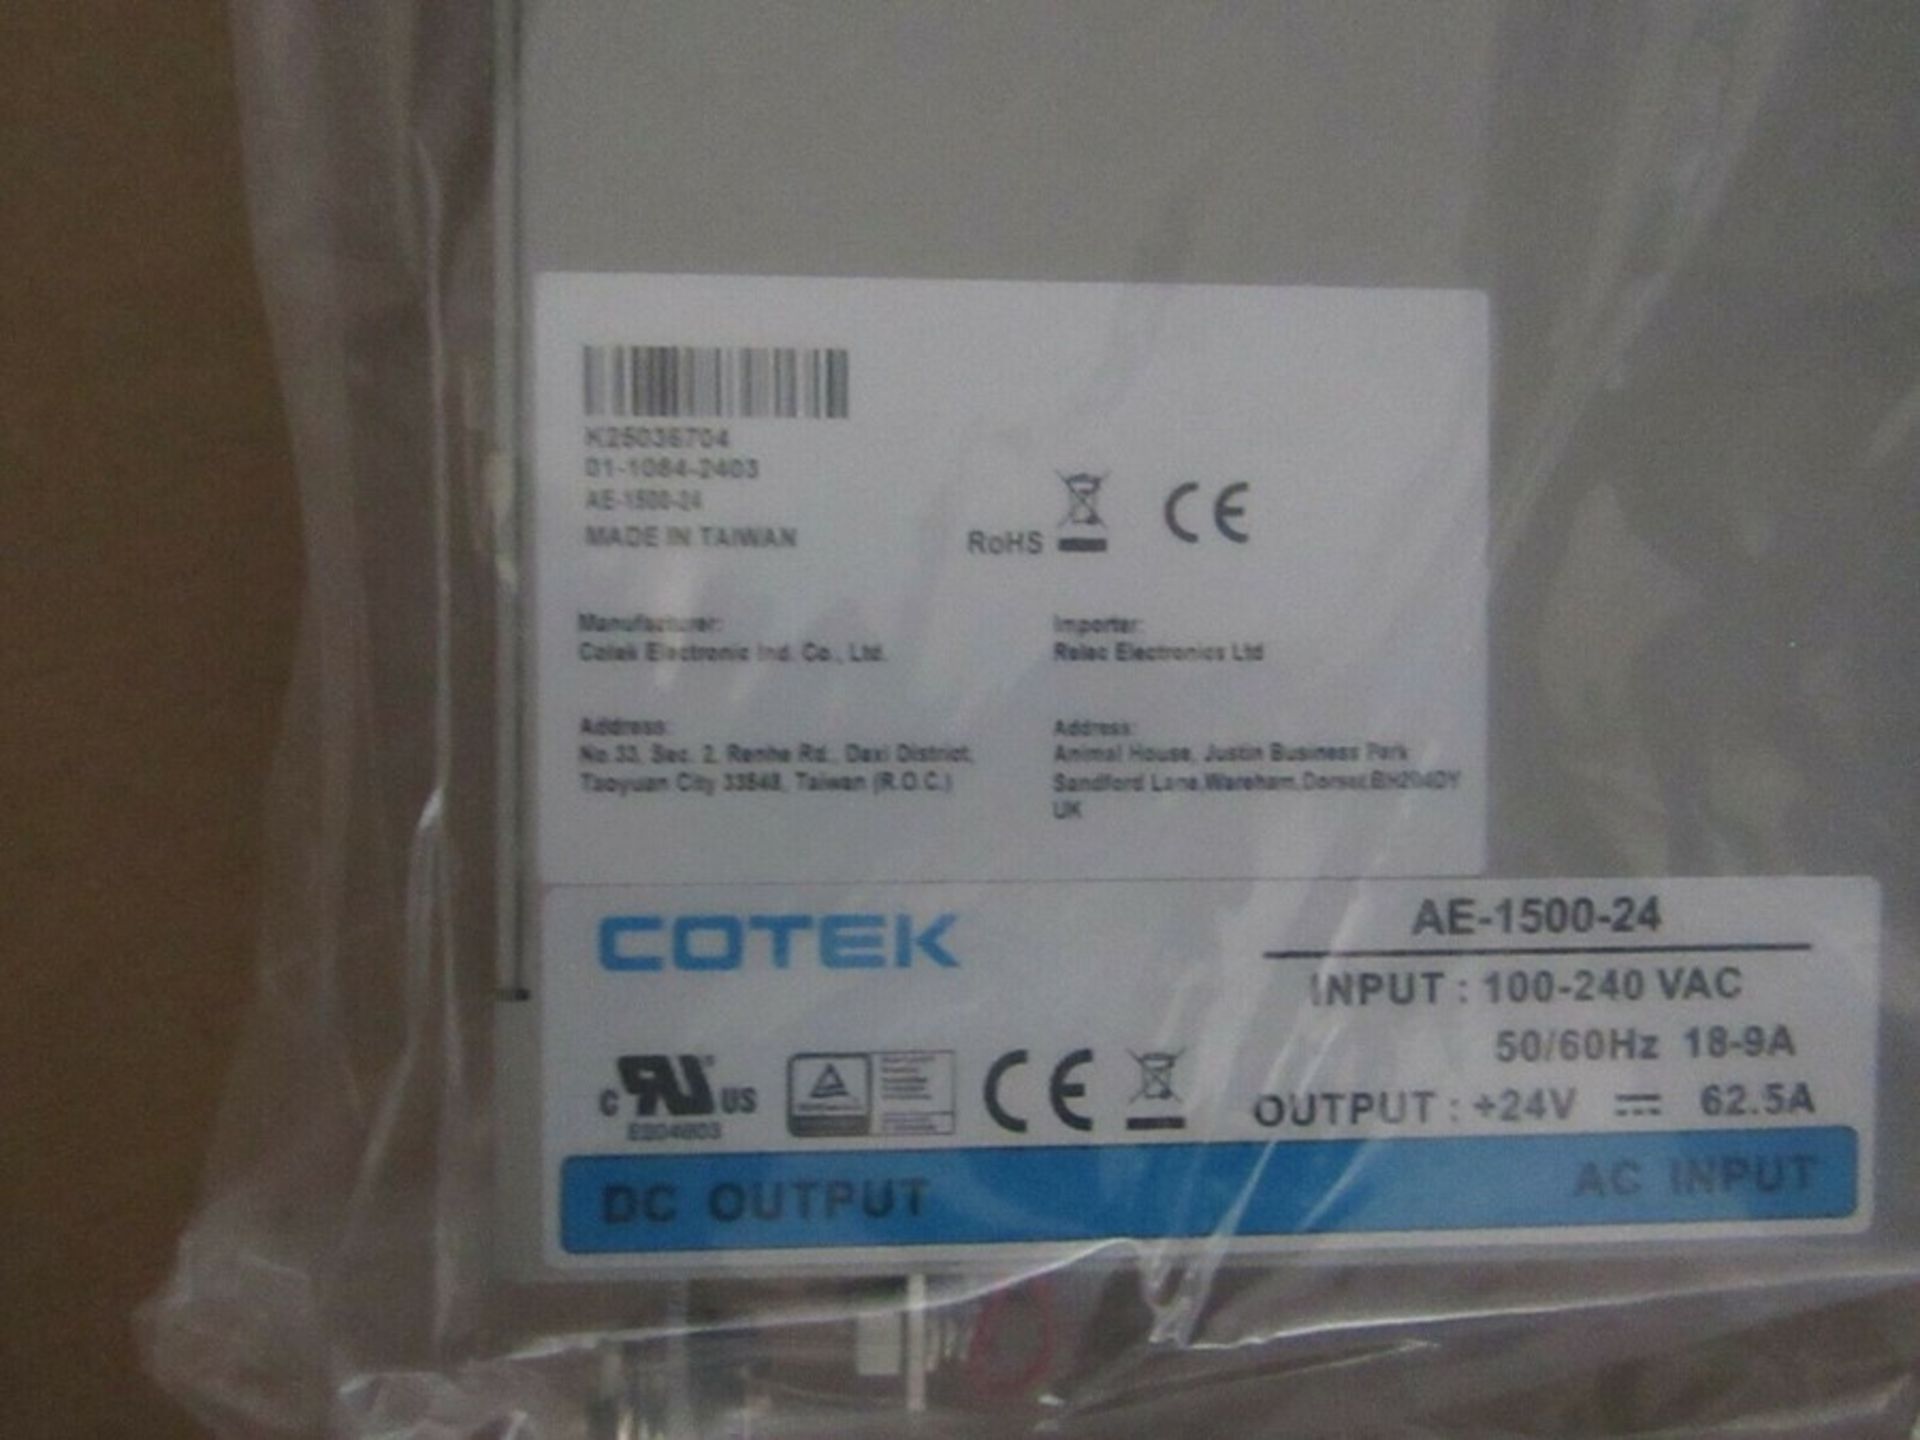 COTEK, 1.5kW Embedded Switch Mode Power Supply SMPS, 24V dc, Enclosed - AE-1500-24 - £12k at co - Image 2 of 3